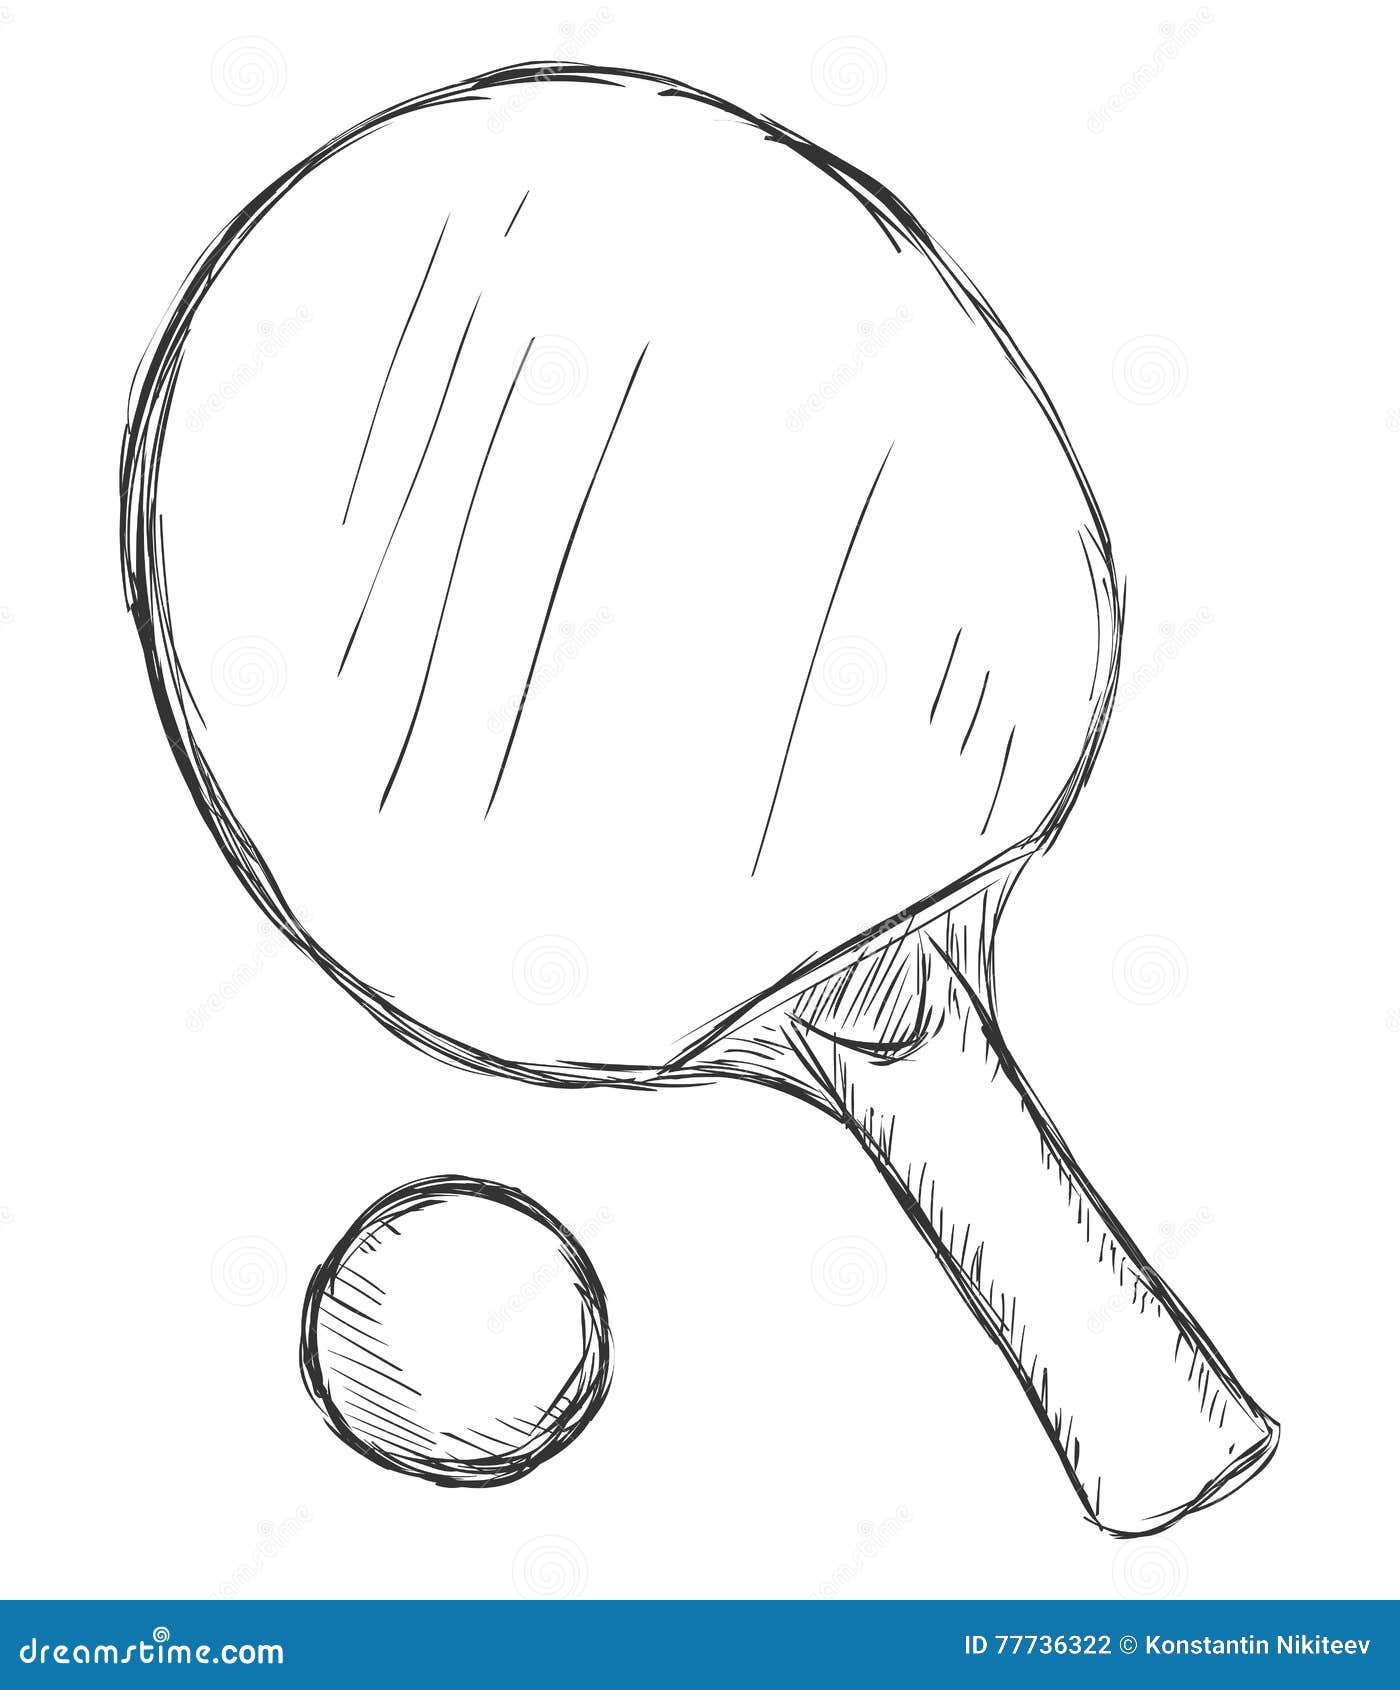 ping pong clipart black and white basketball